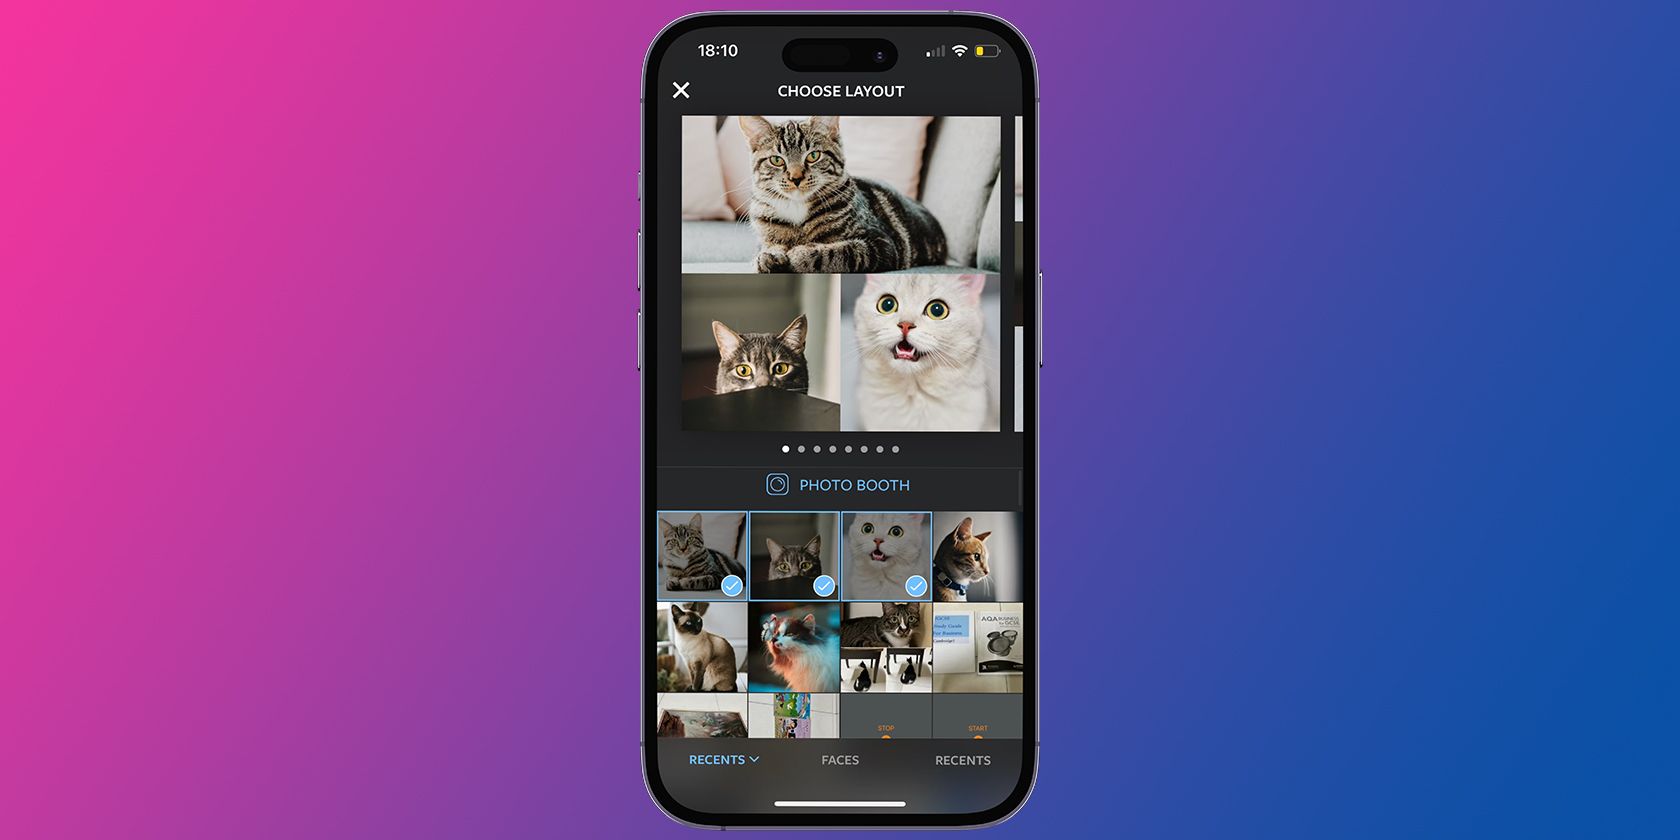 Instagram Layout app running on an iPhone with a gradient background